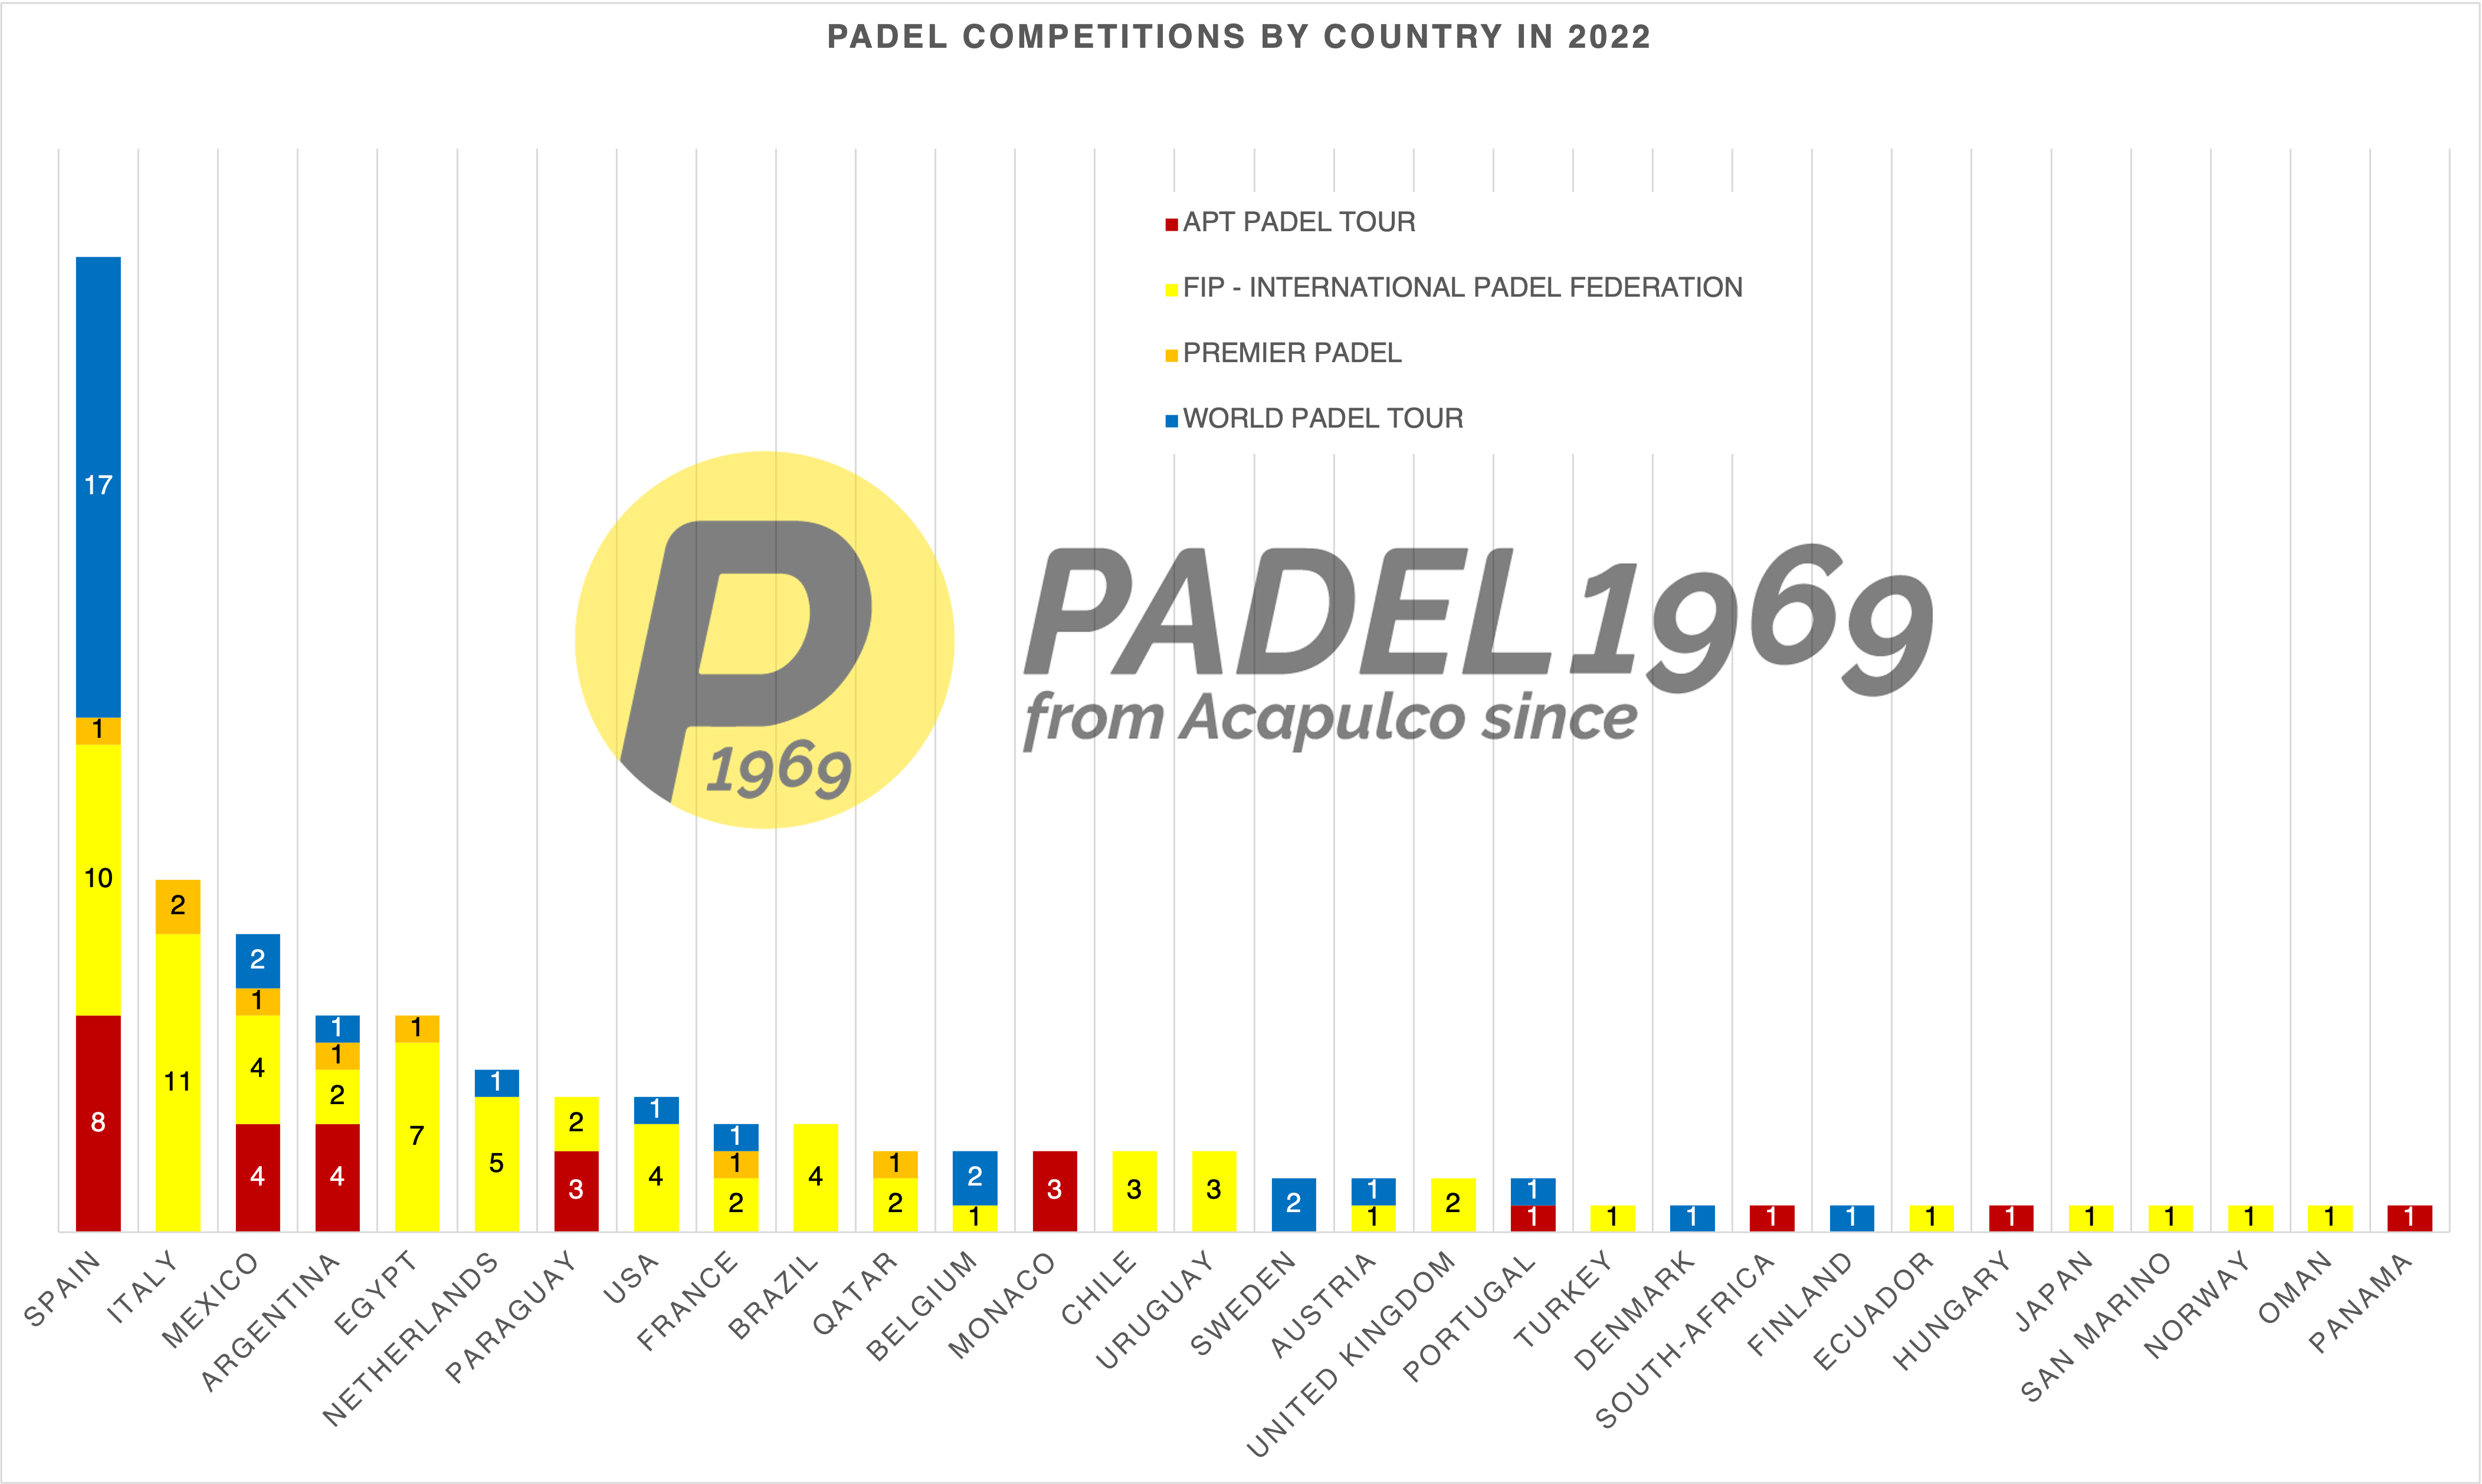 Padel Competitions by Country in 2022